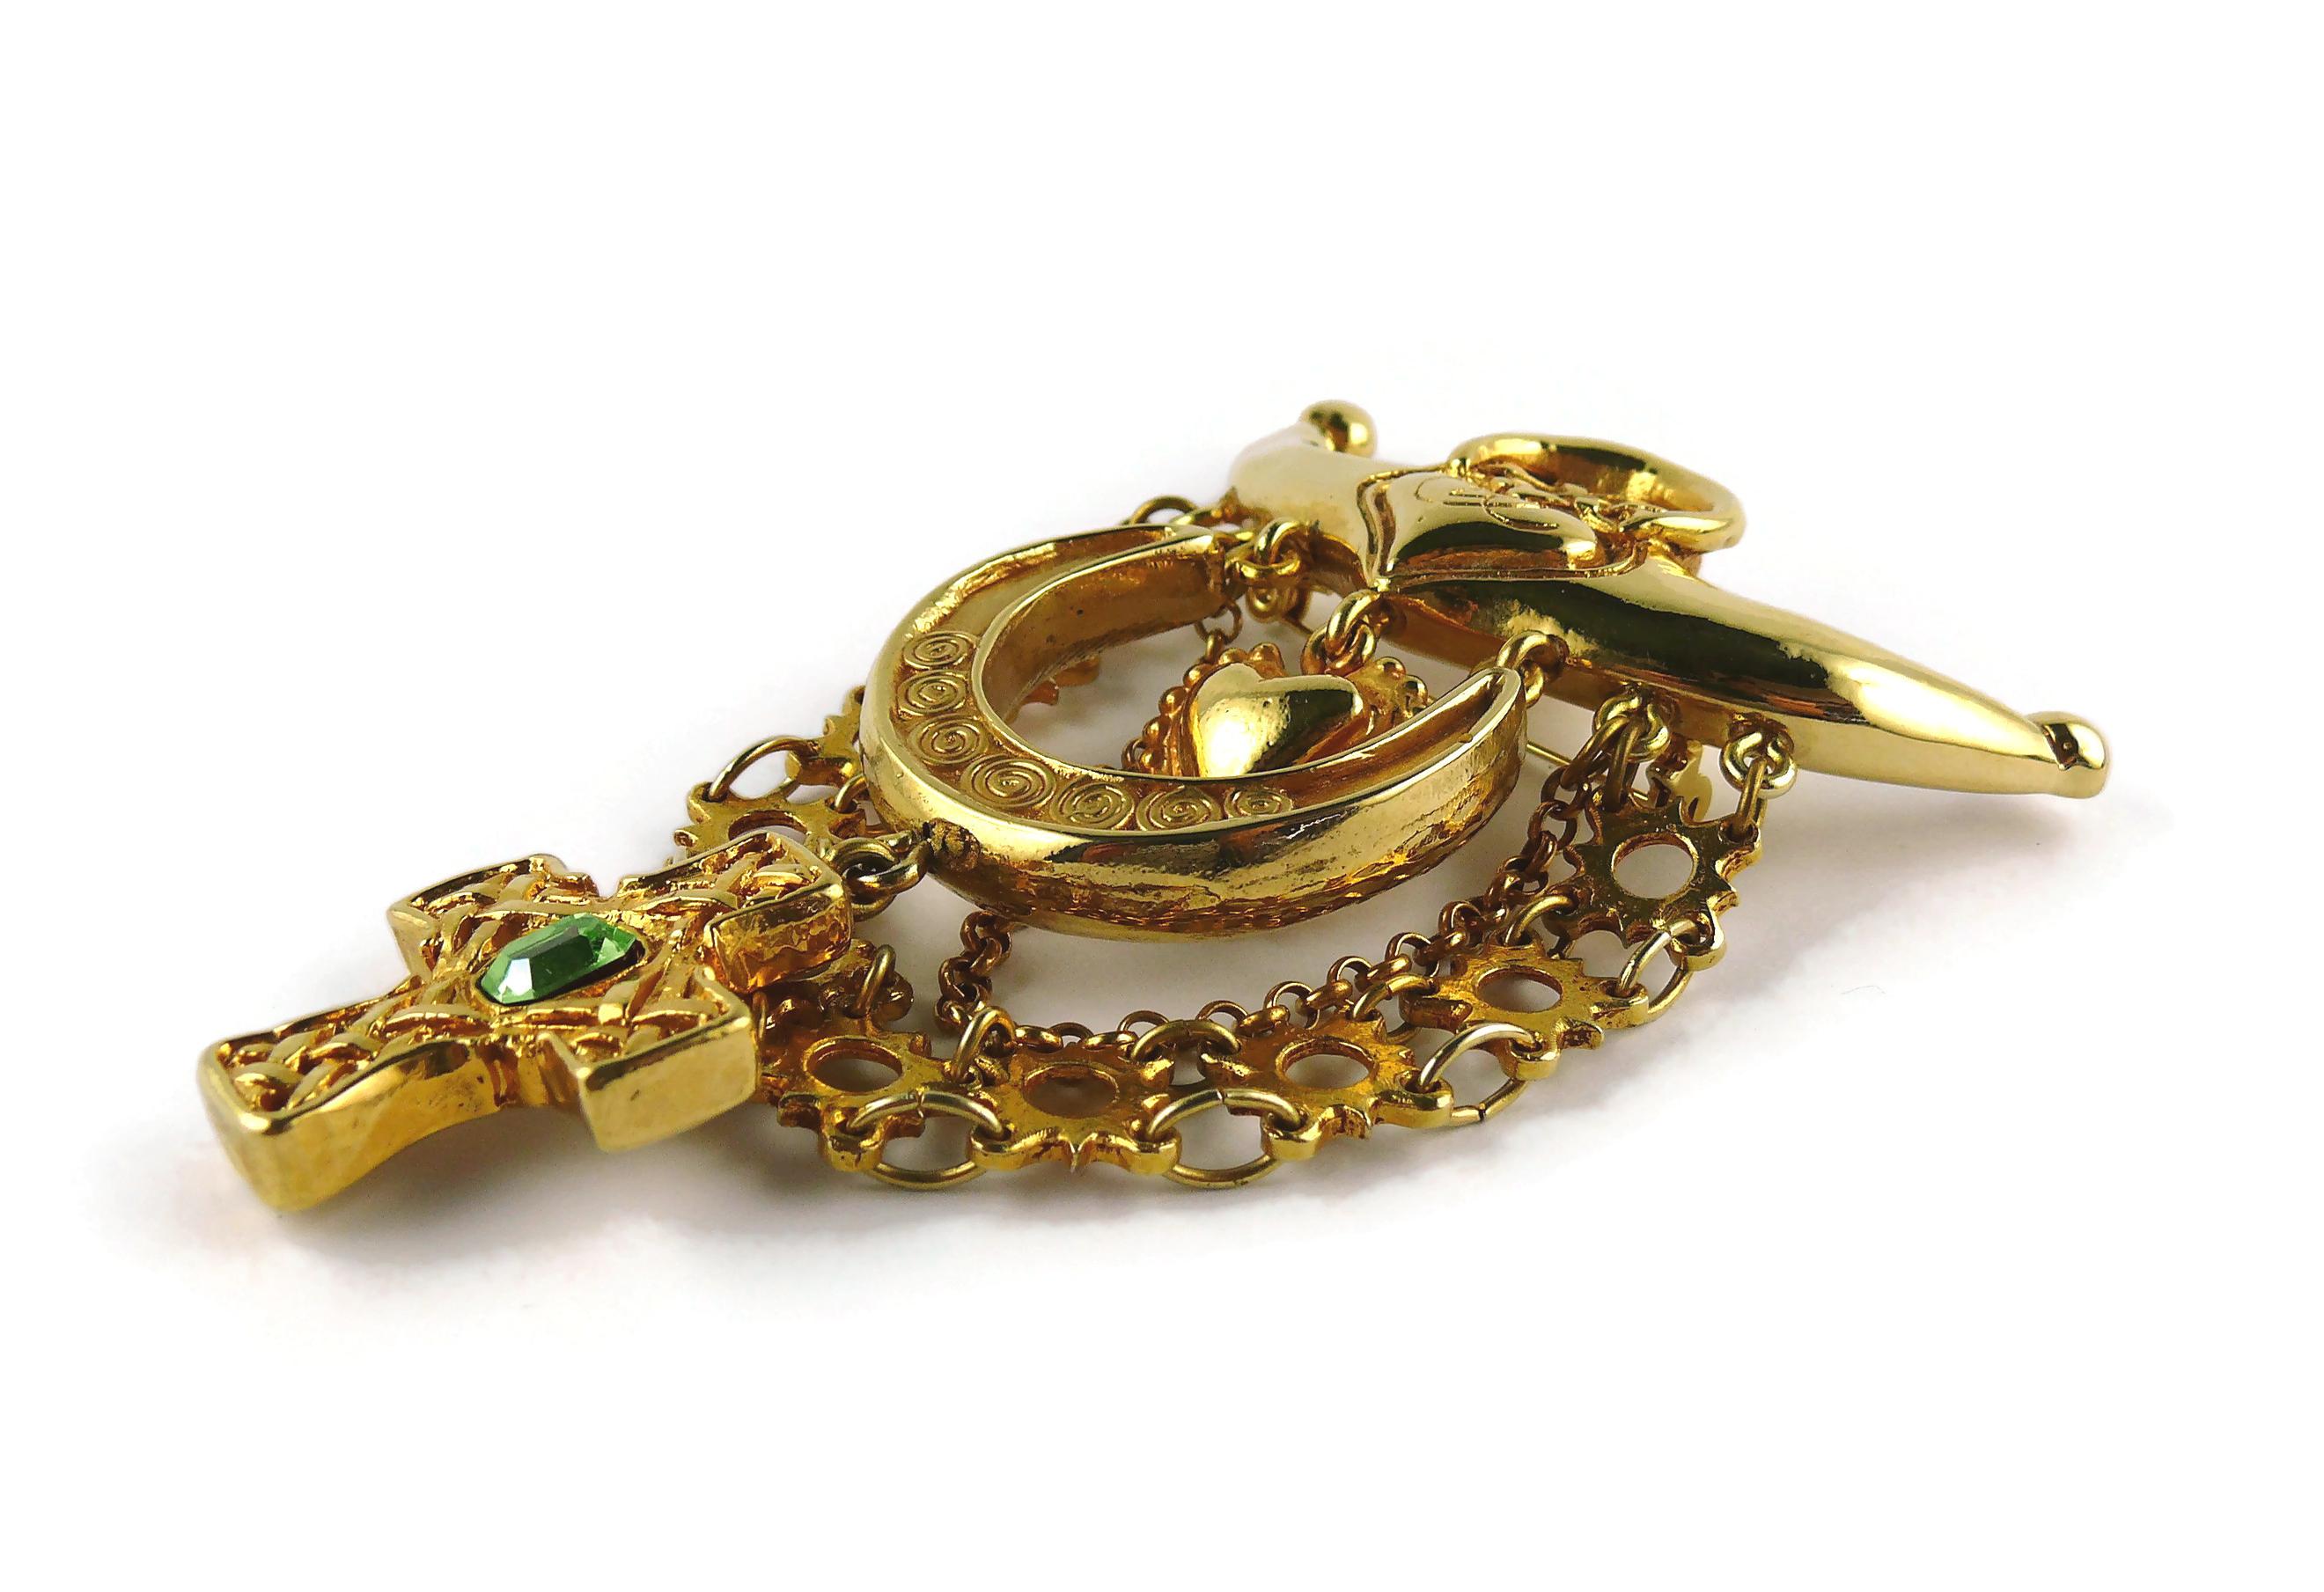 Christian Lacroix Vintage Opulent Arlesian Inspired Brooch For Sale 3